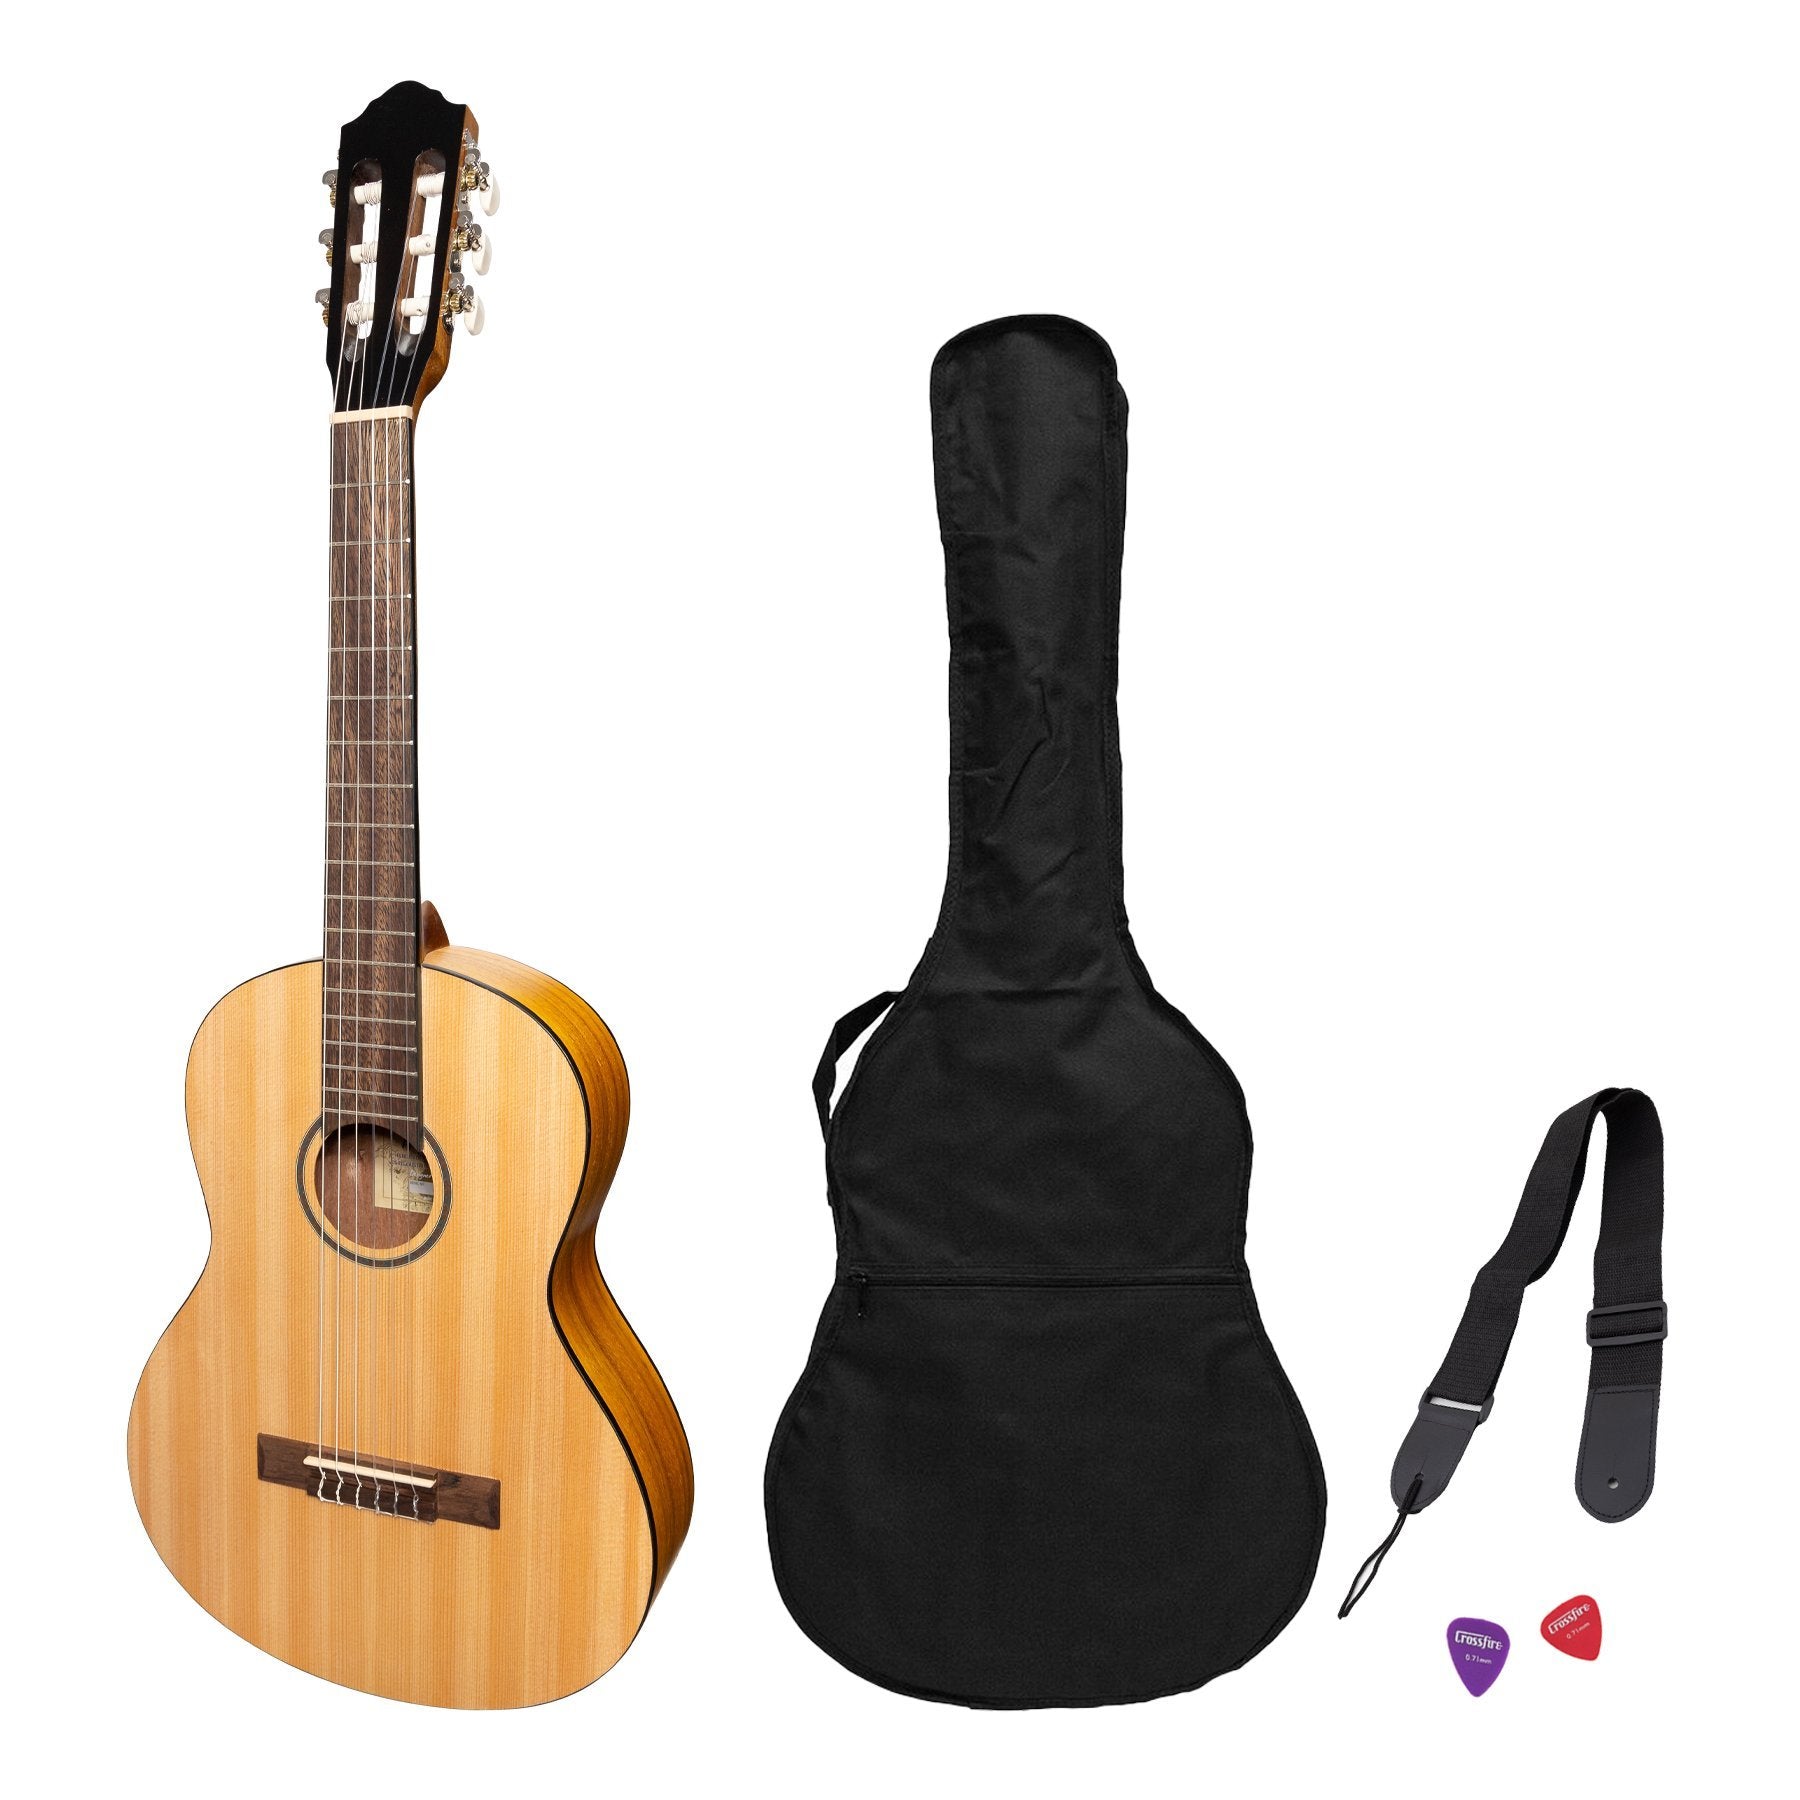 Martinez 3/4 Size Student Classical Guitar Pack with Built In Tuner (Spruce/Koa)-MP-34T-SK